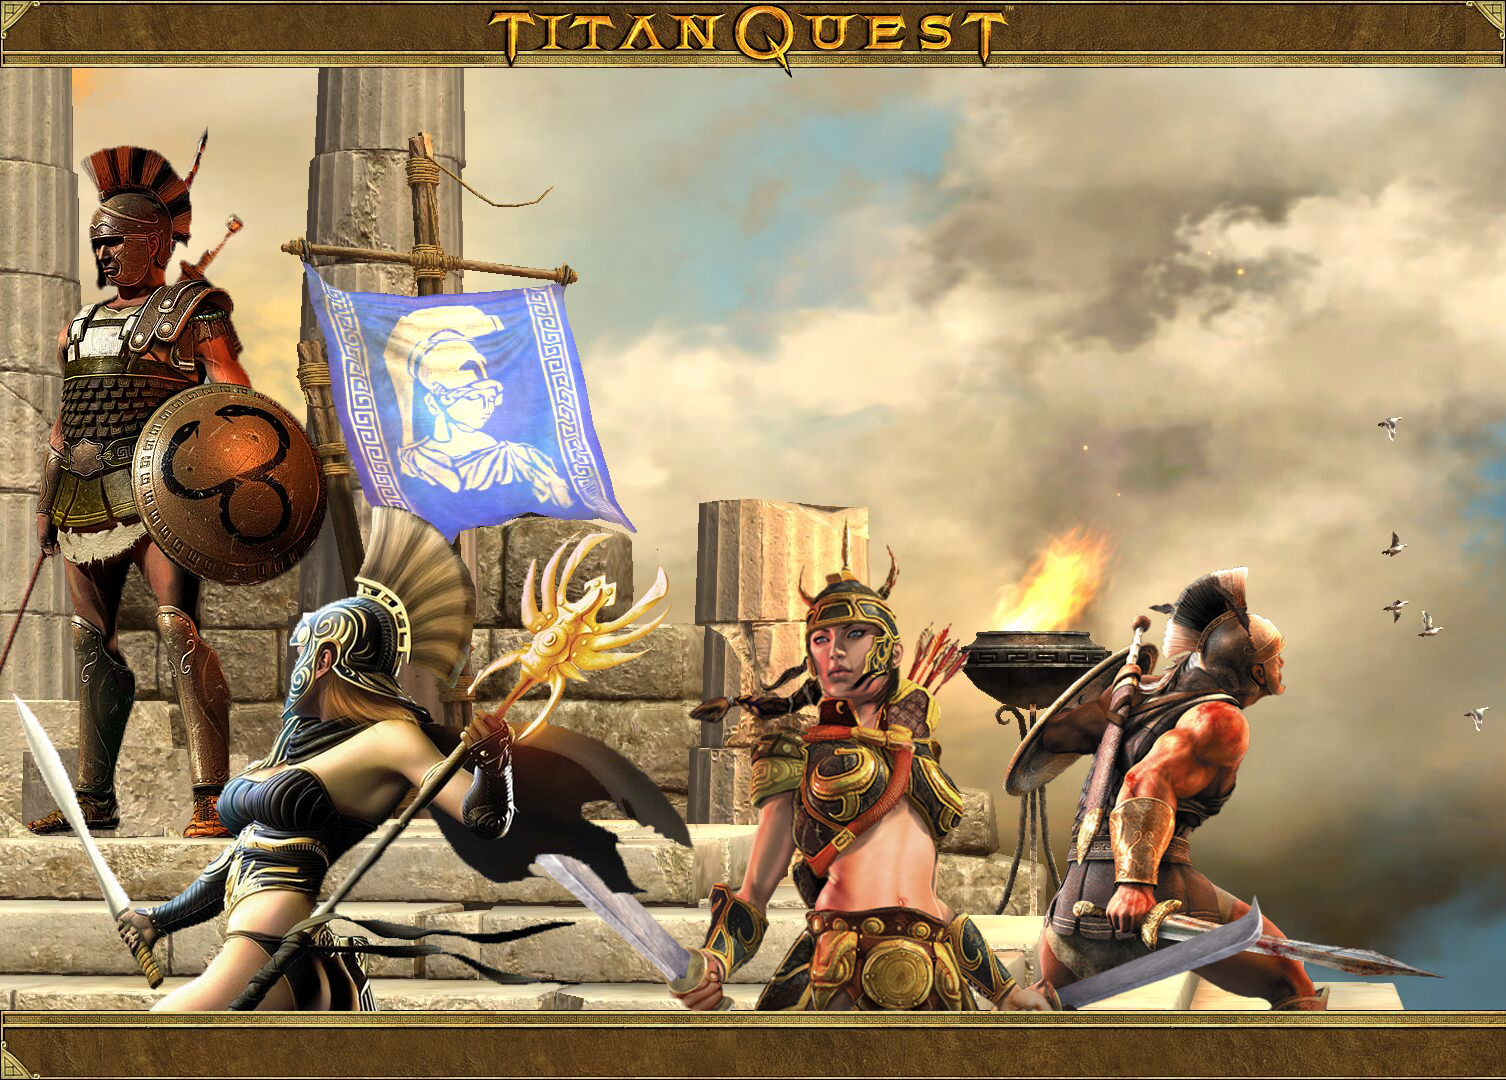 Titan Quest Arriving on Consoles in 2018